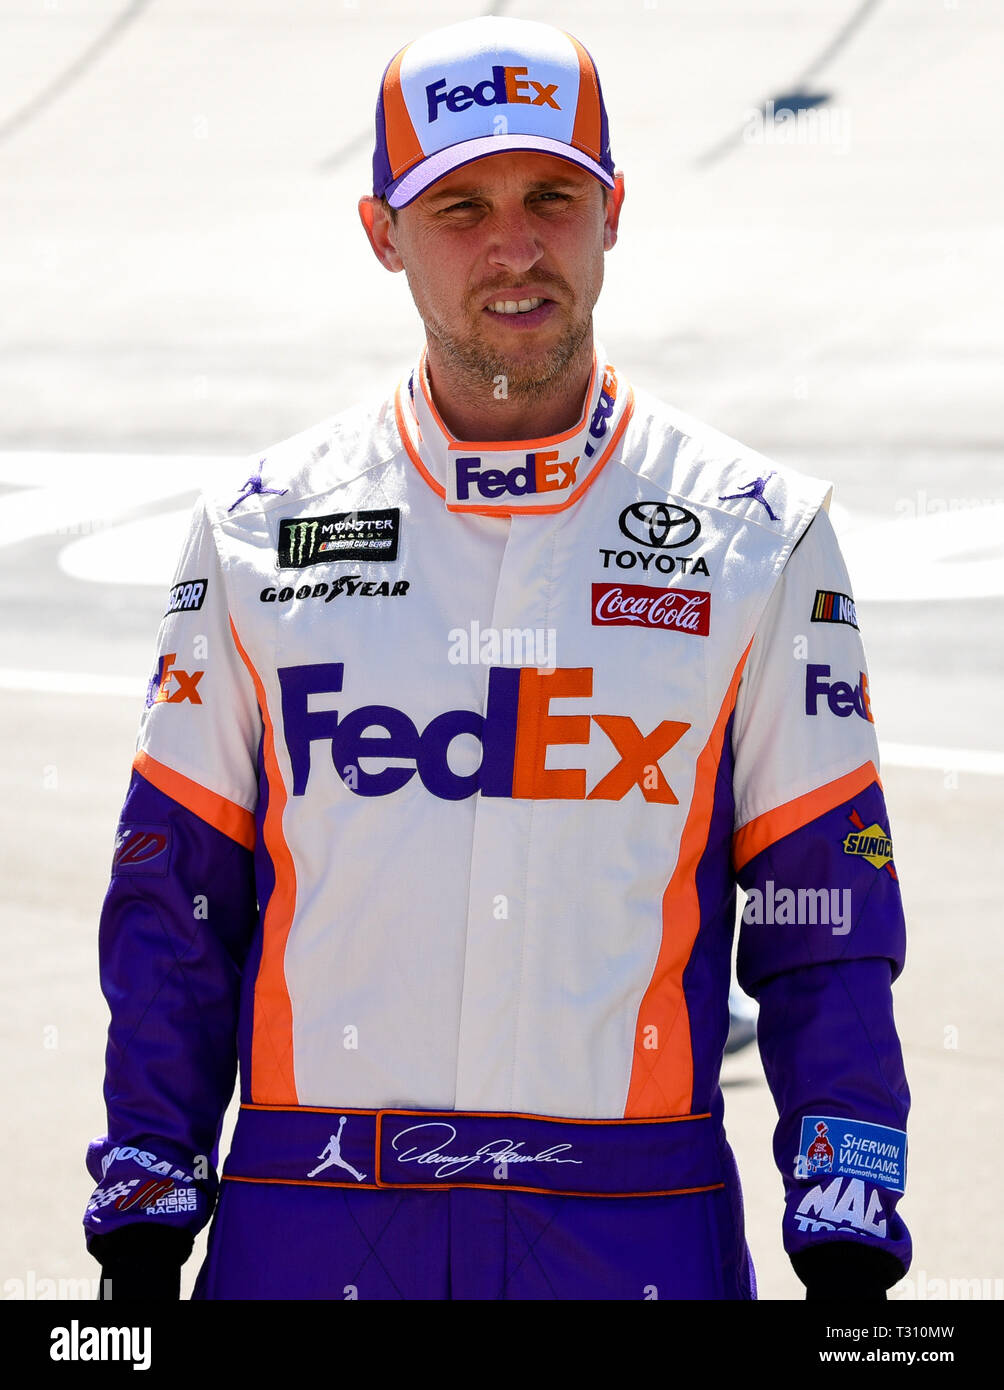 April 5, 2019 - NASCAR Monster Energy Cup Driver DENNY HAMLIN on April 5, 2019 at Bristol Motor Speedway in Bristol, Tennessee Credit: Ed Clemente/ZUMA Wire/Alamy Live News Stock Photo